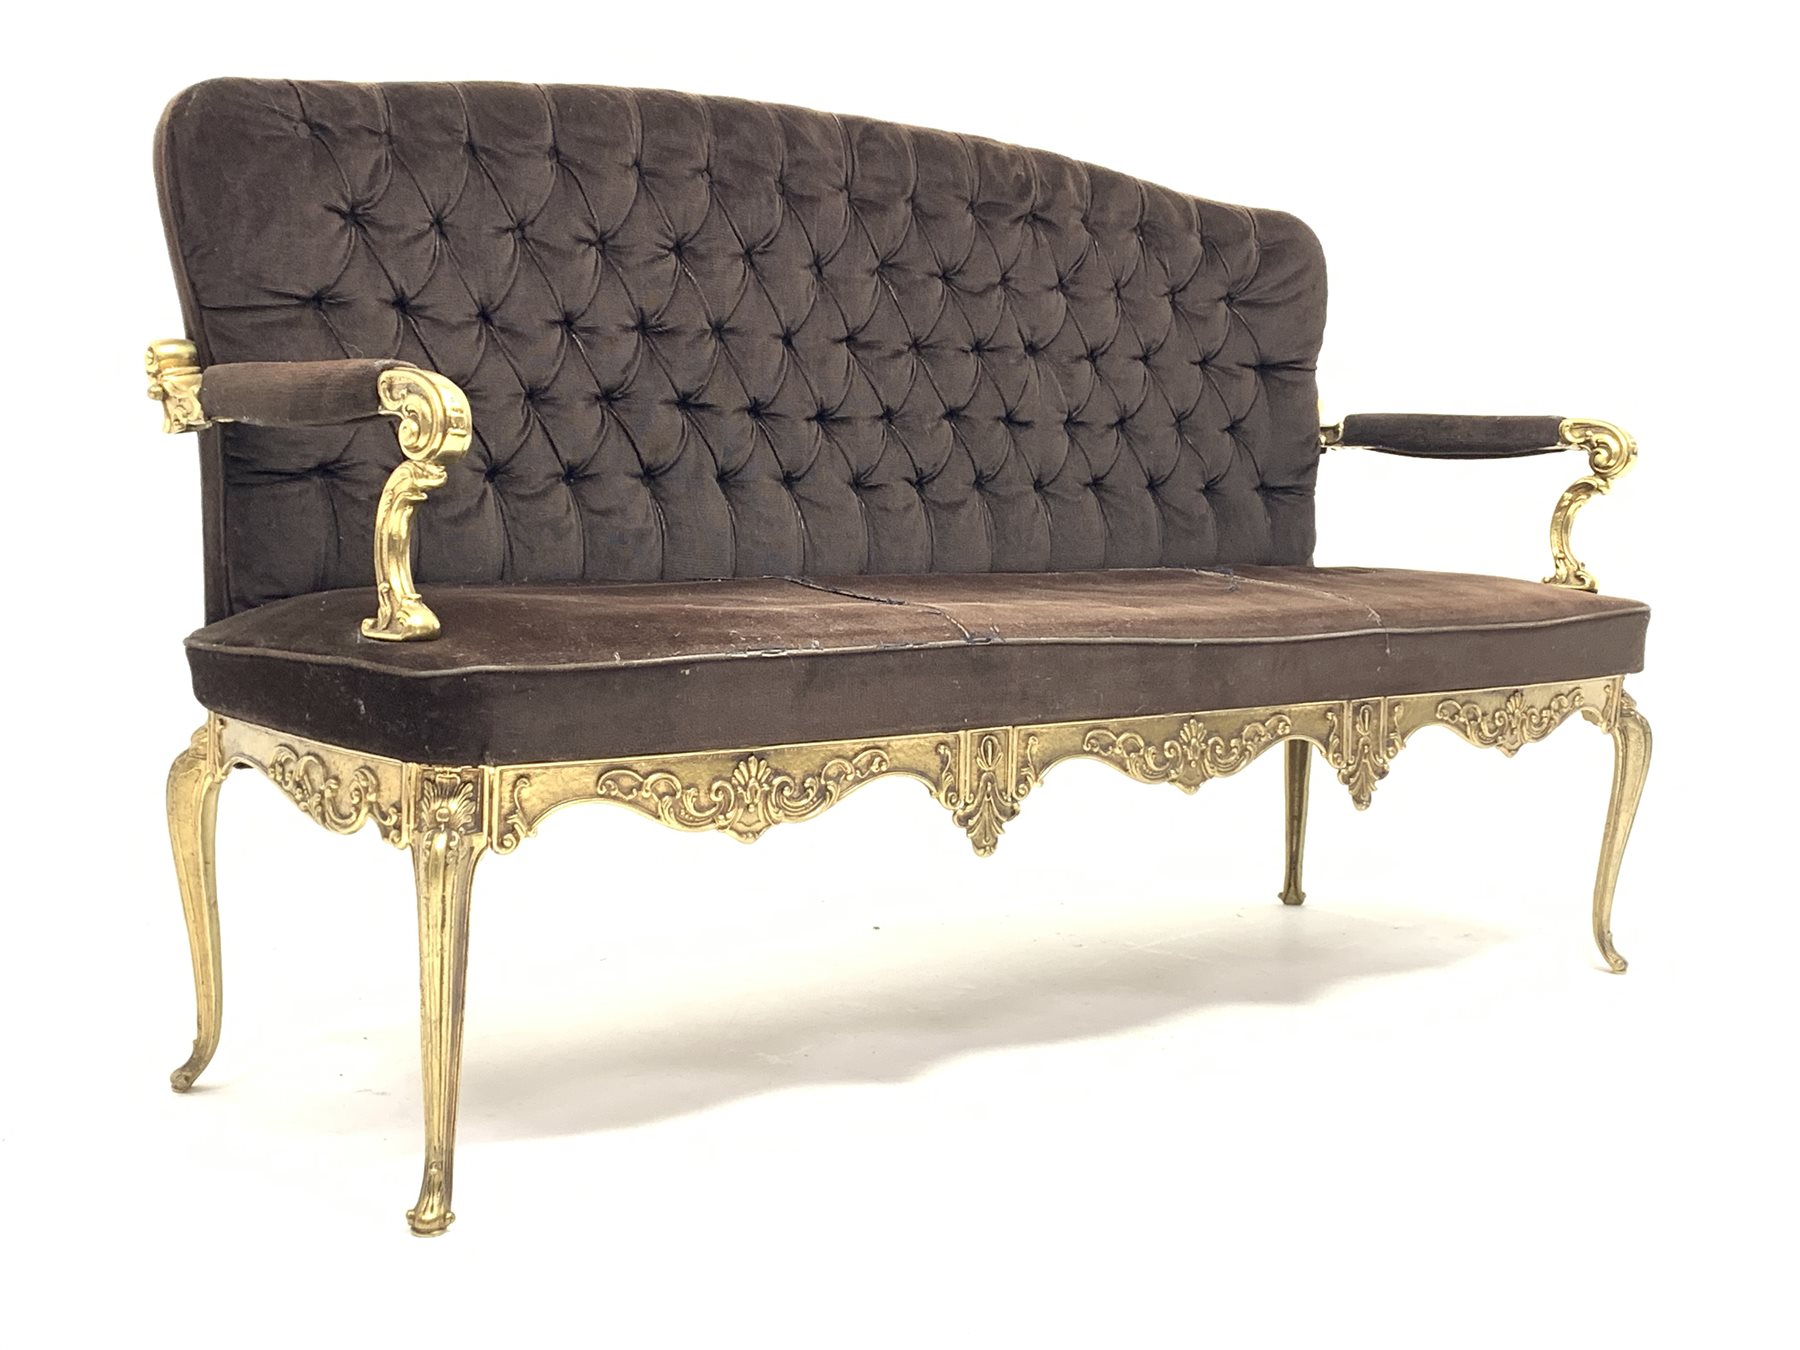 Italian 'Hollywood Regency' cast brass three salon settee, seat and back upholstered in buttoned br